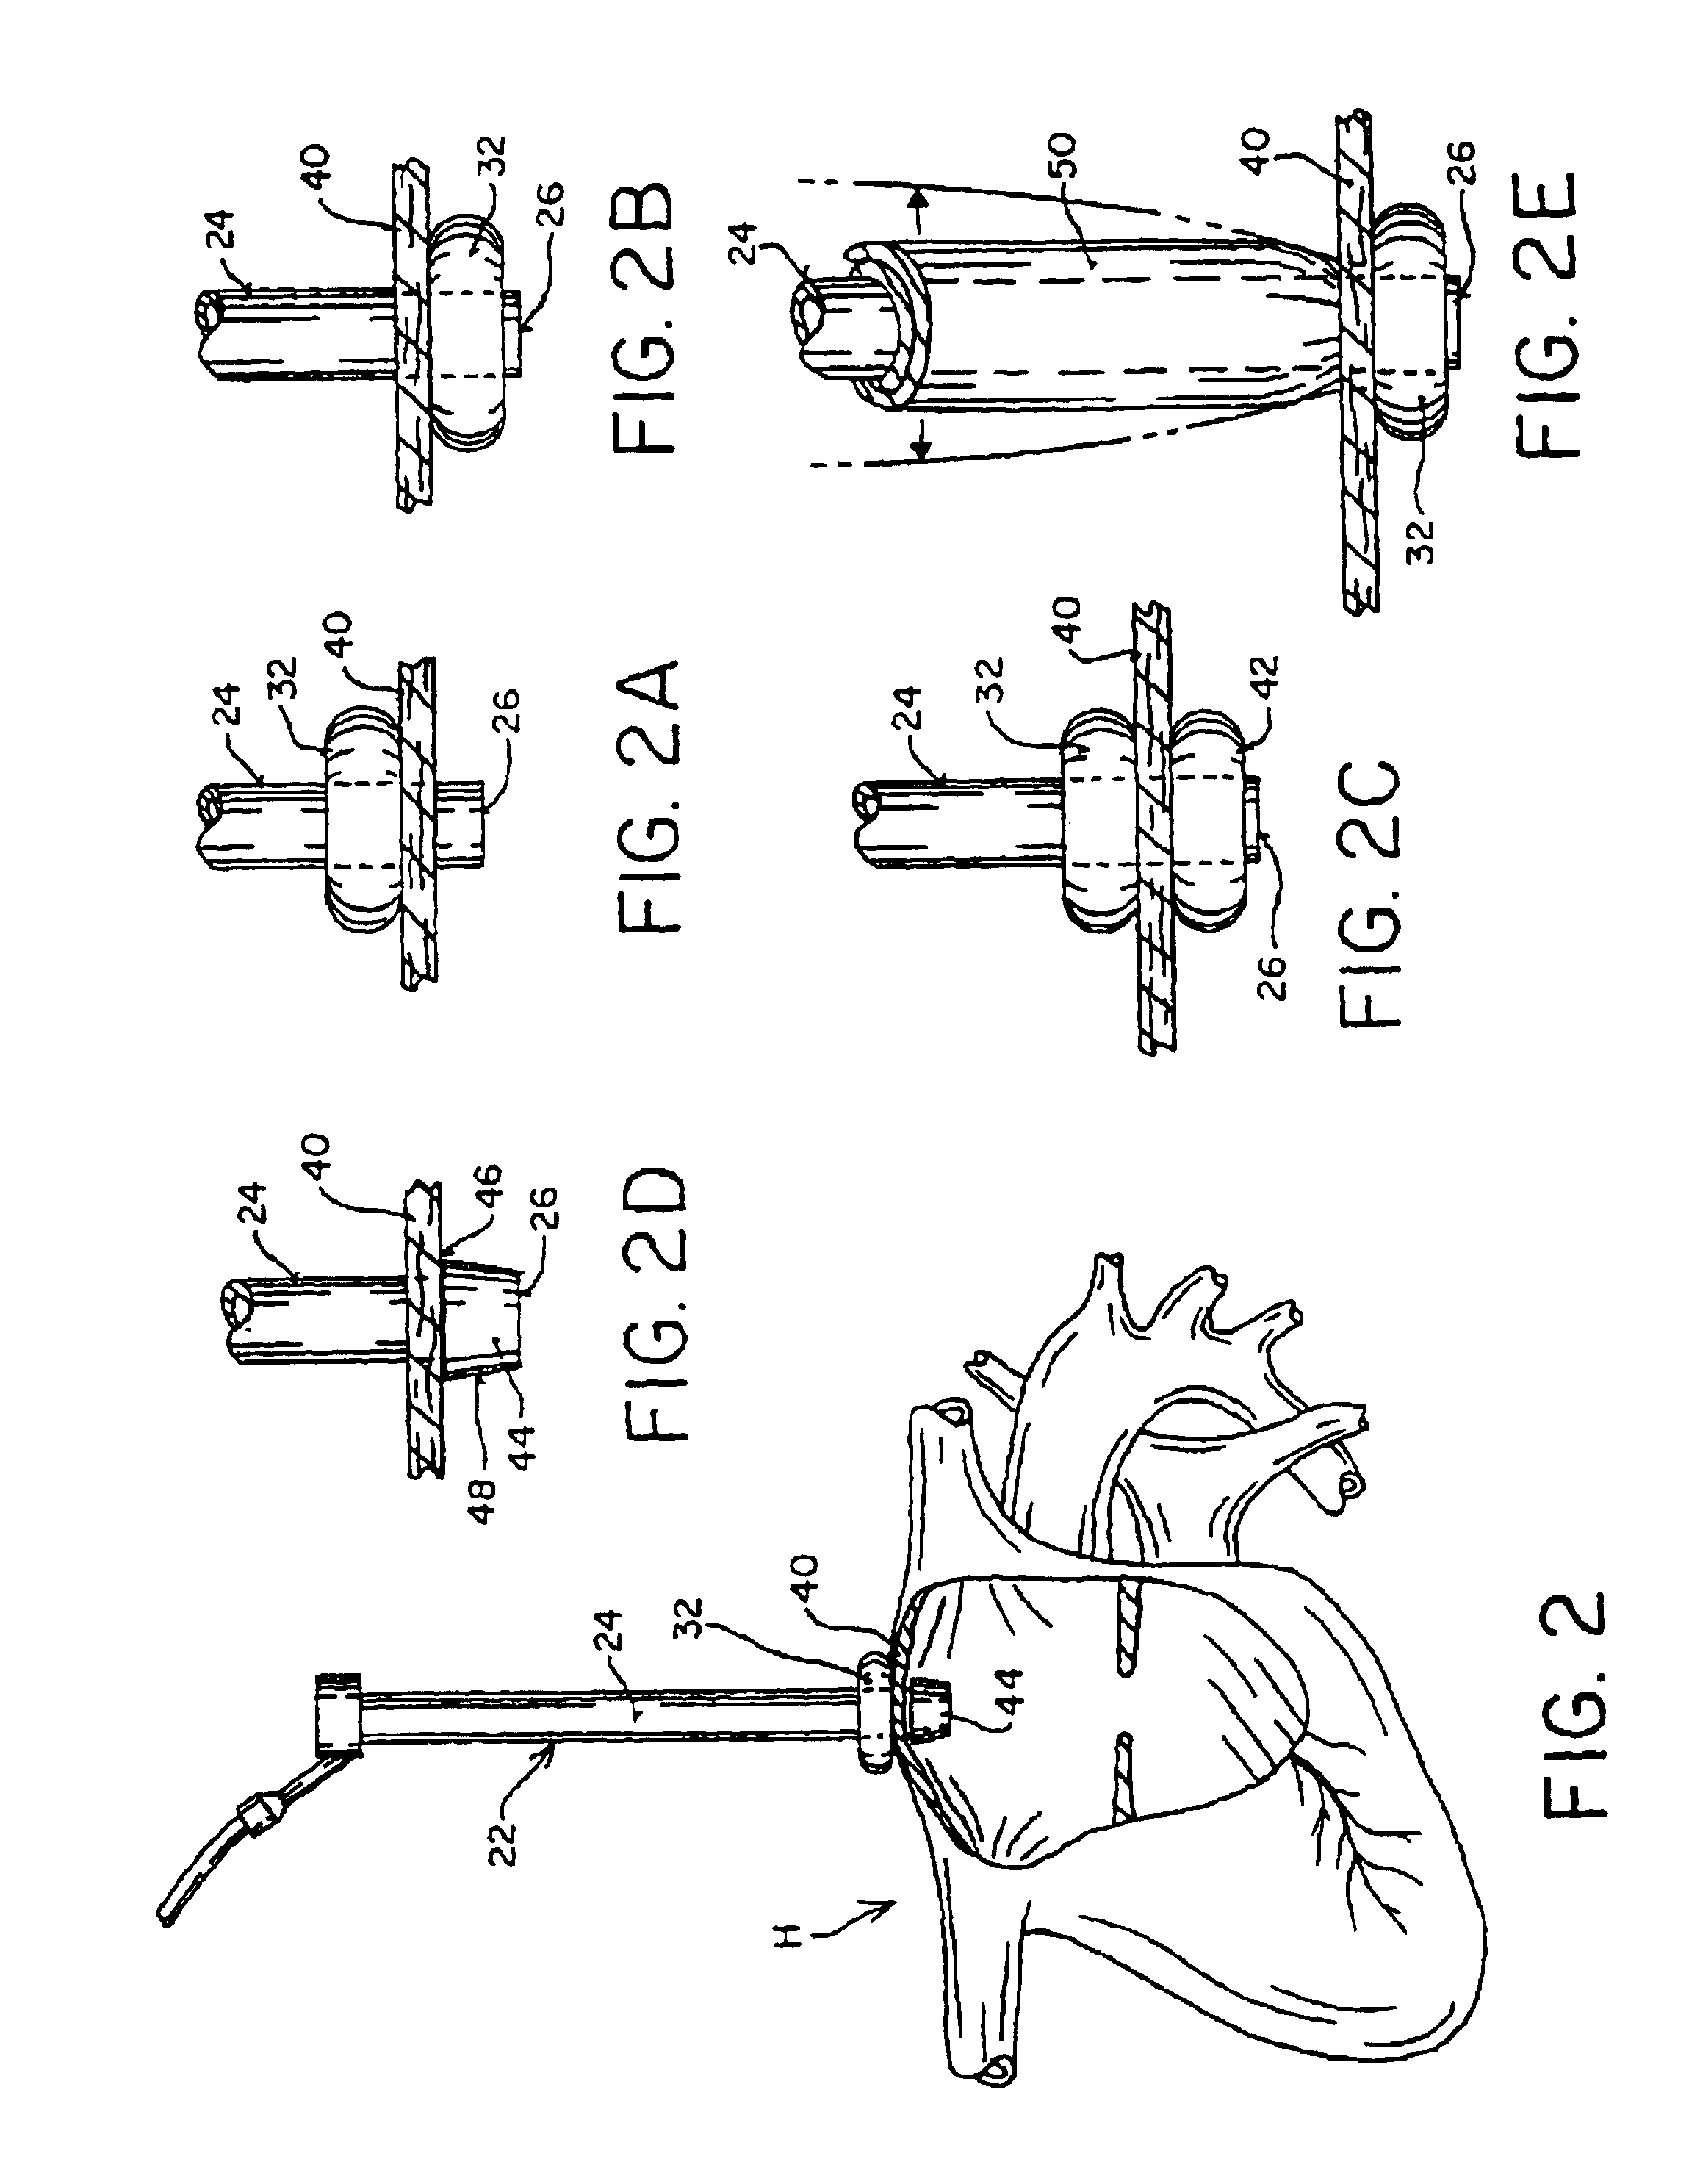 Method and apparatus for thoracoscopic intracardiac procedures